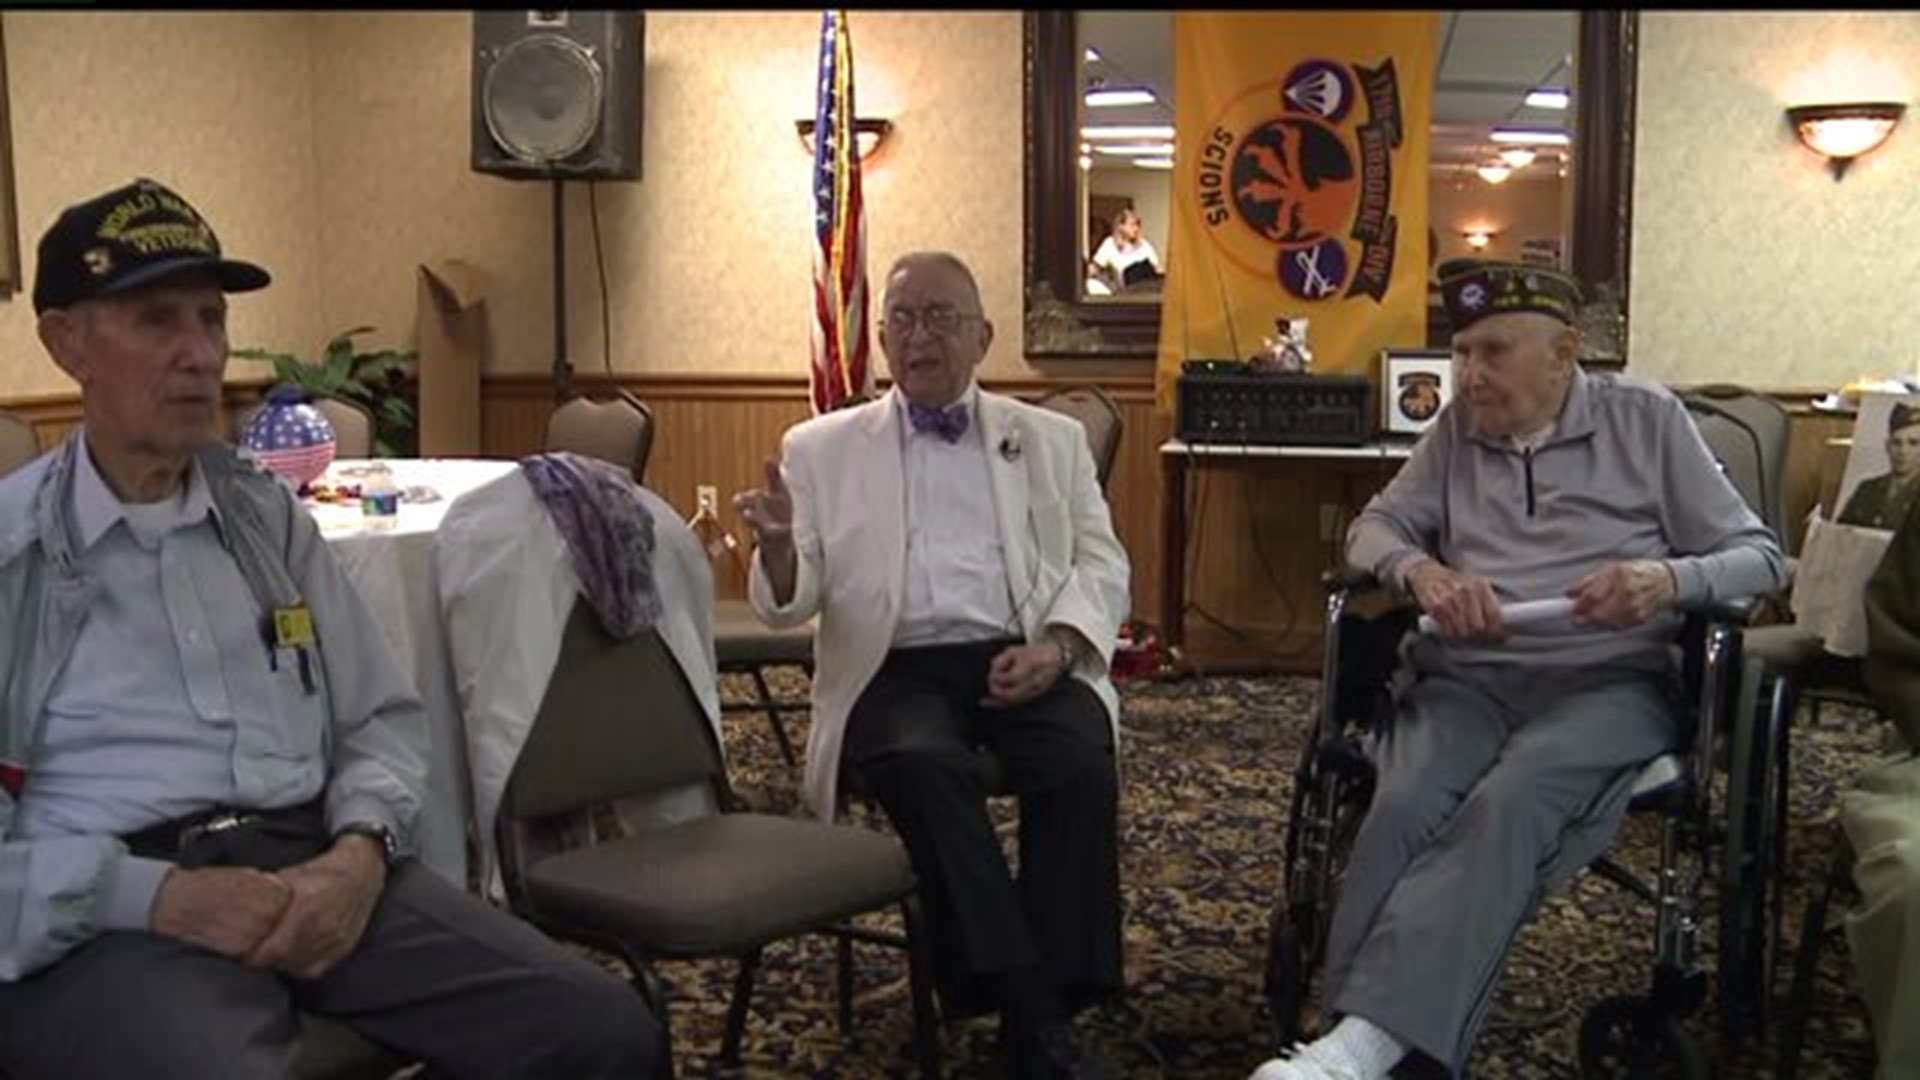 WWII veterans gather for a reunion